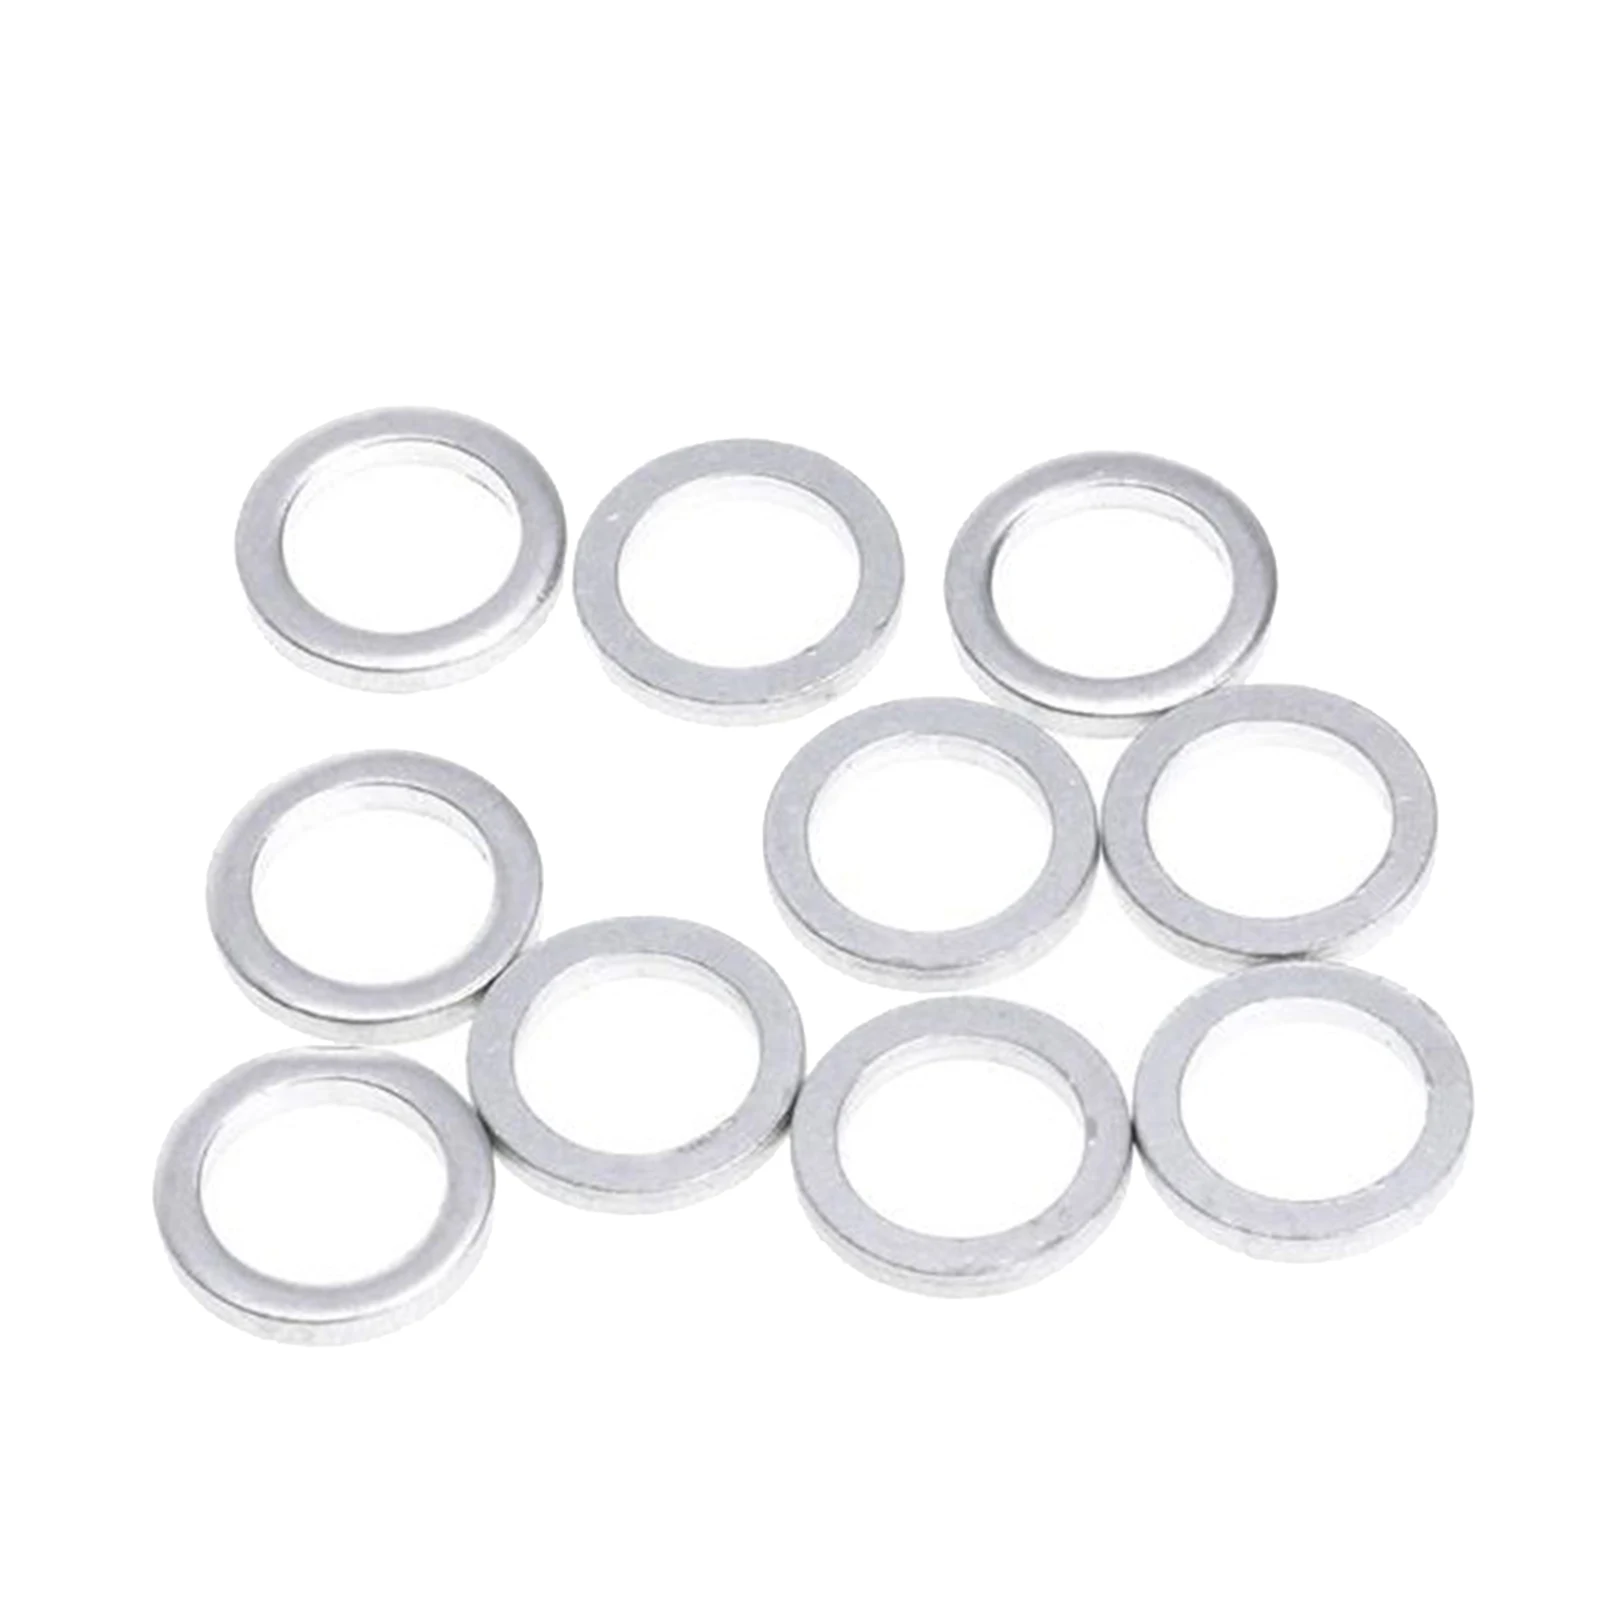 10pcs Silver 1mm Aluminum Spacer Shim for Bicycle Chainring  Screws